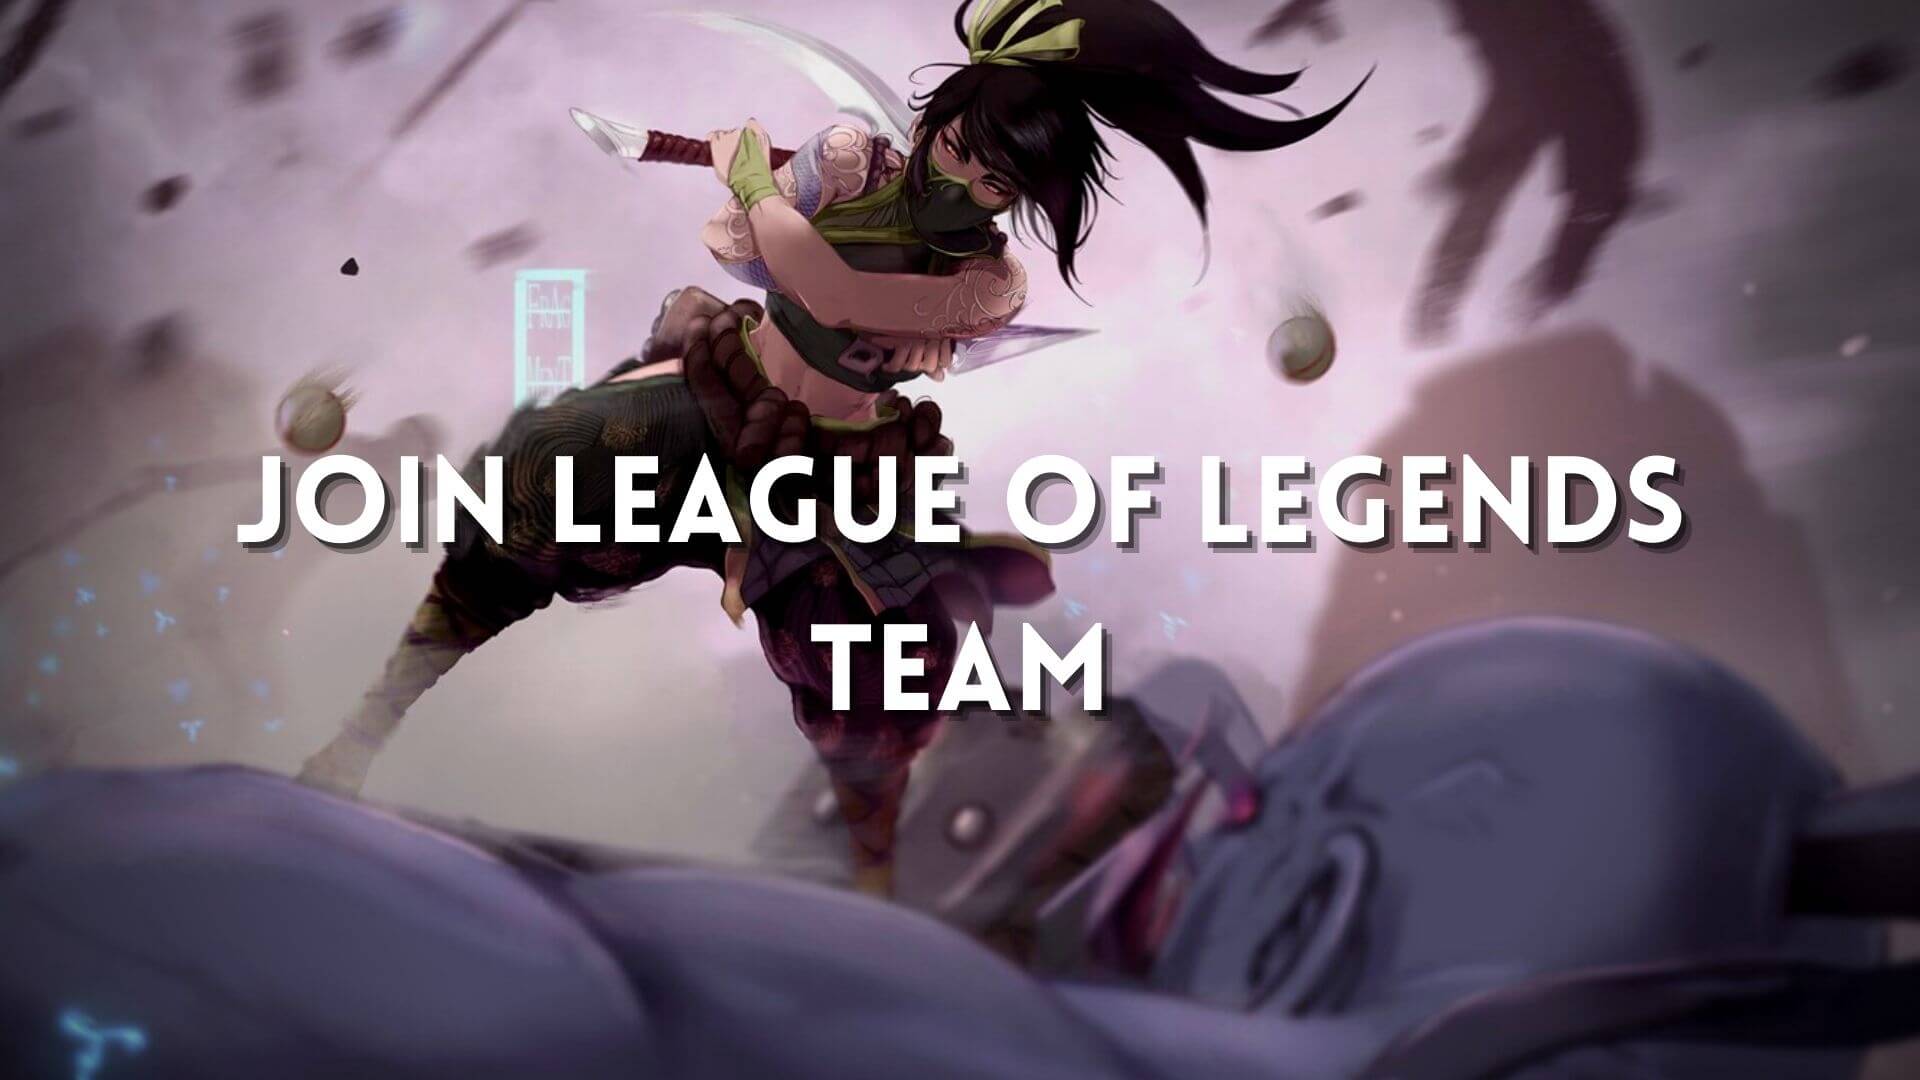 How to join a League of Legends team